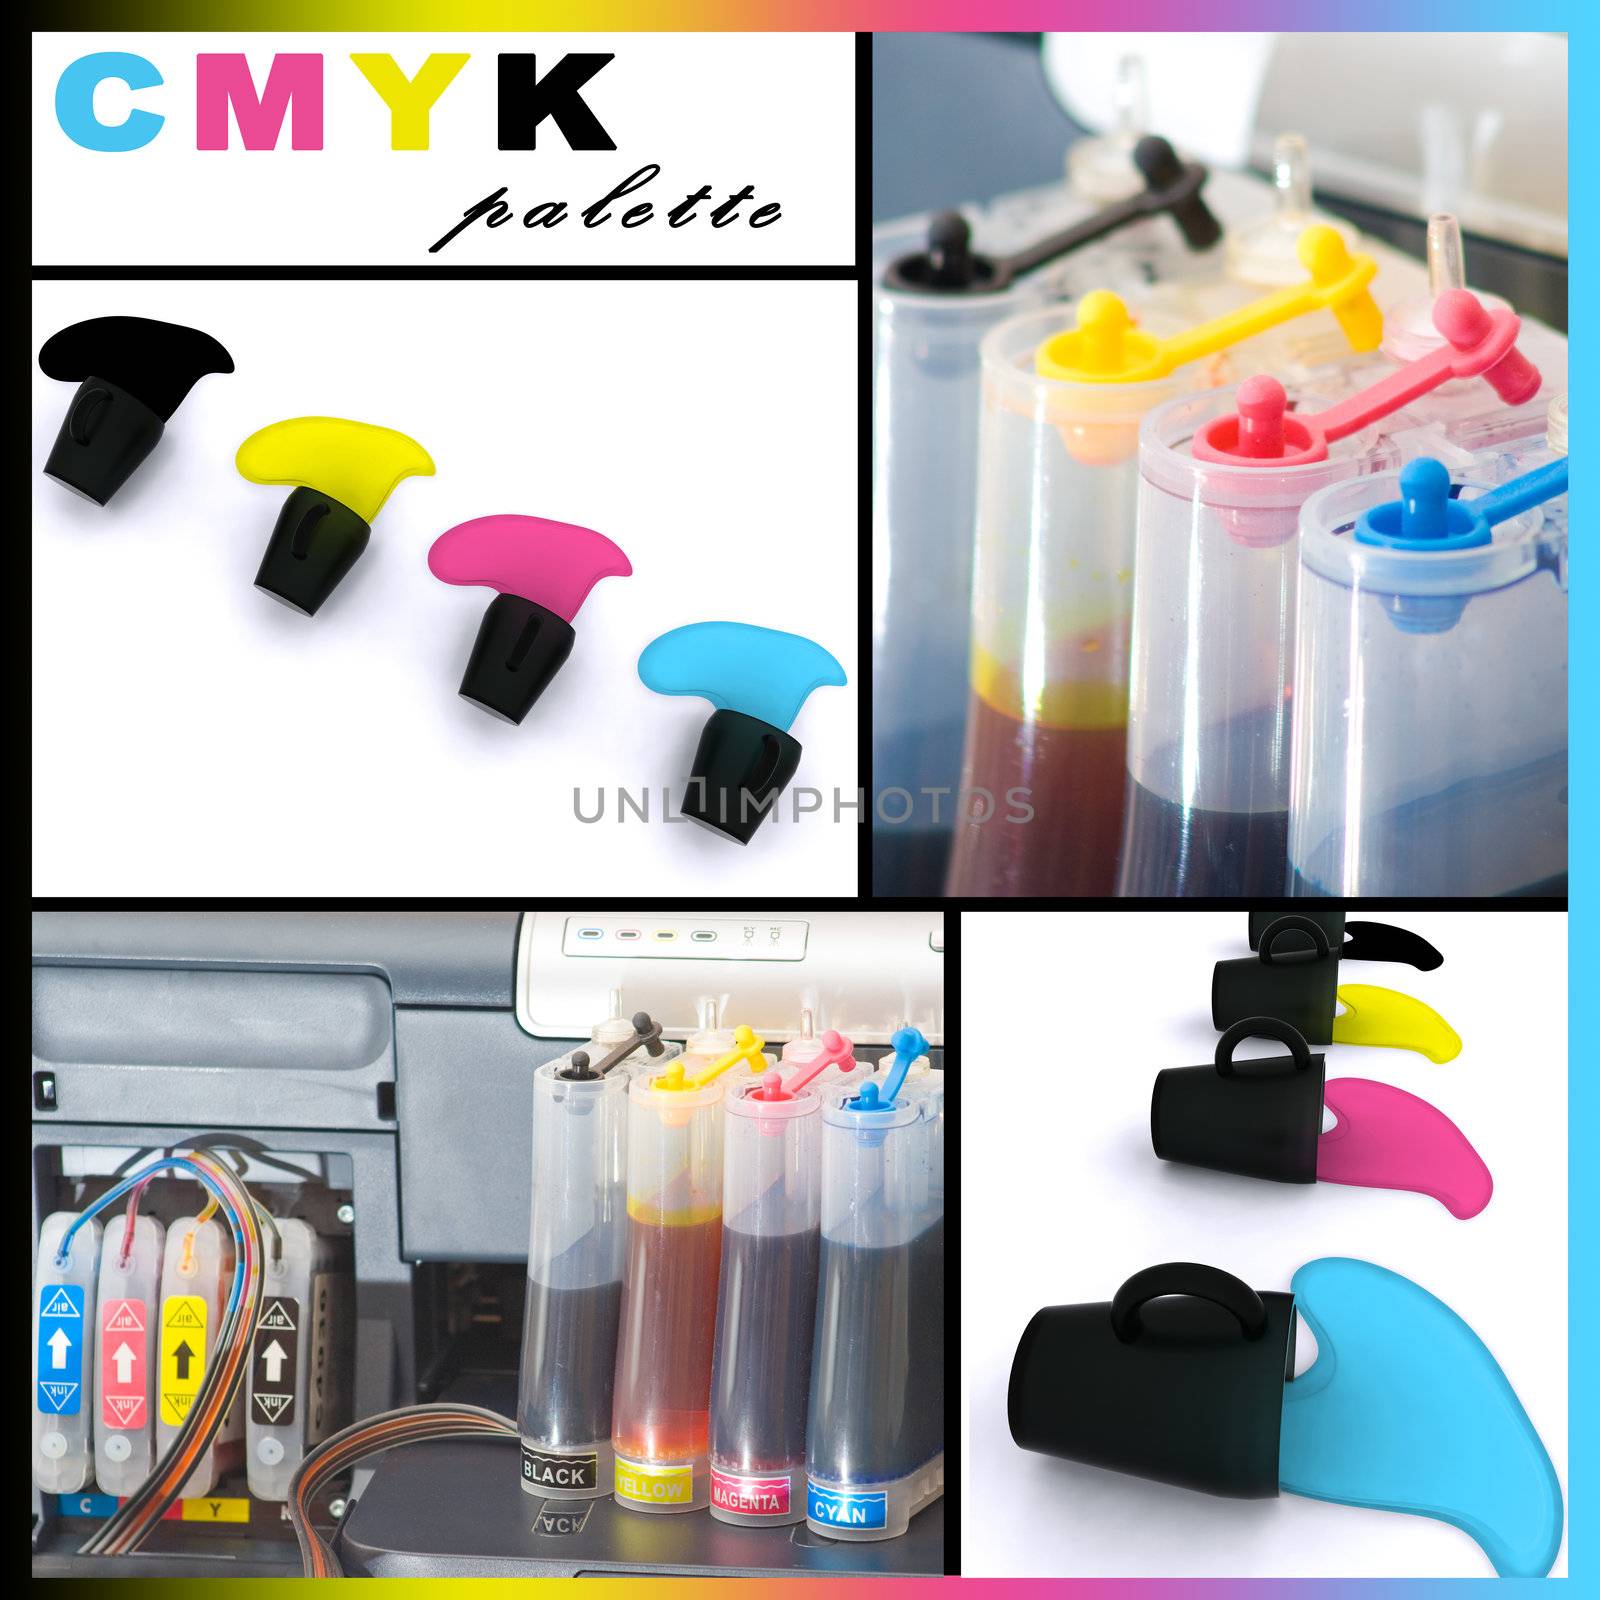 Different images put in one, representing CMYK palette and printing.